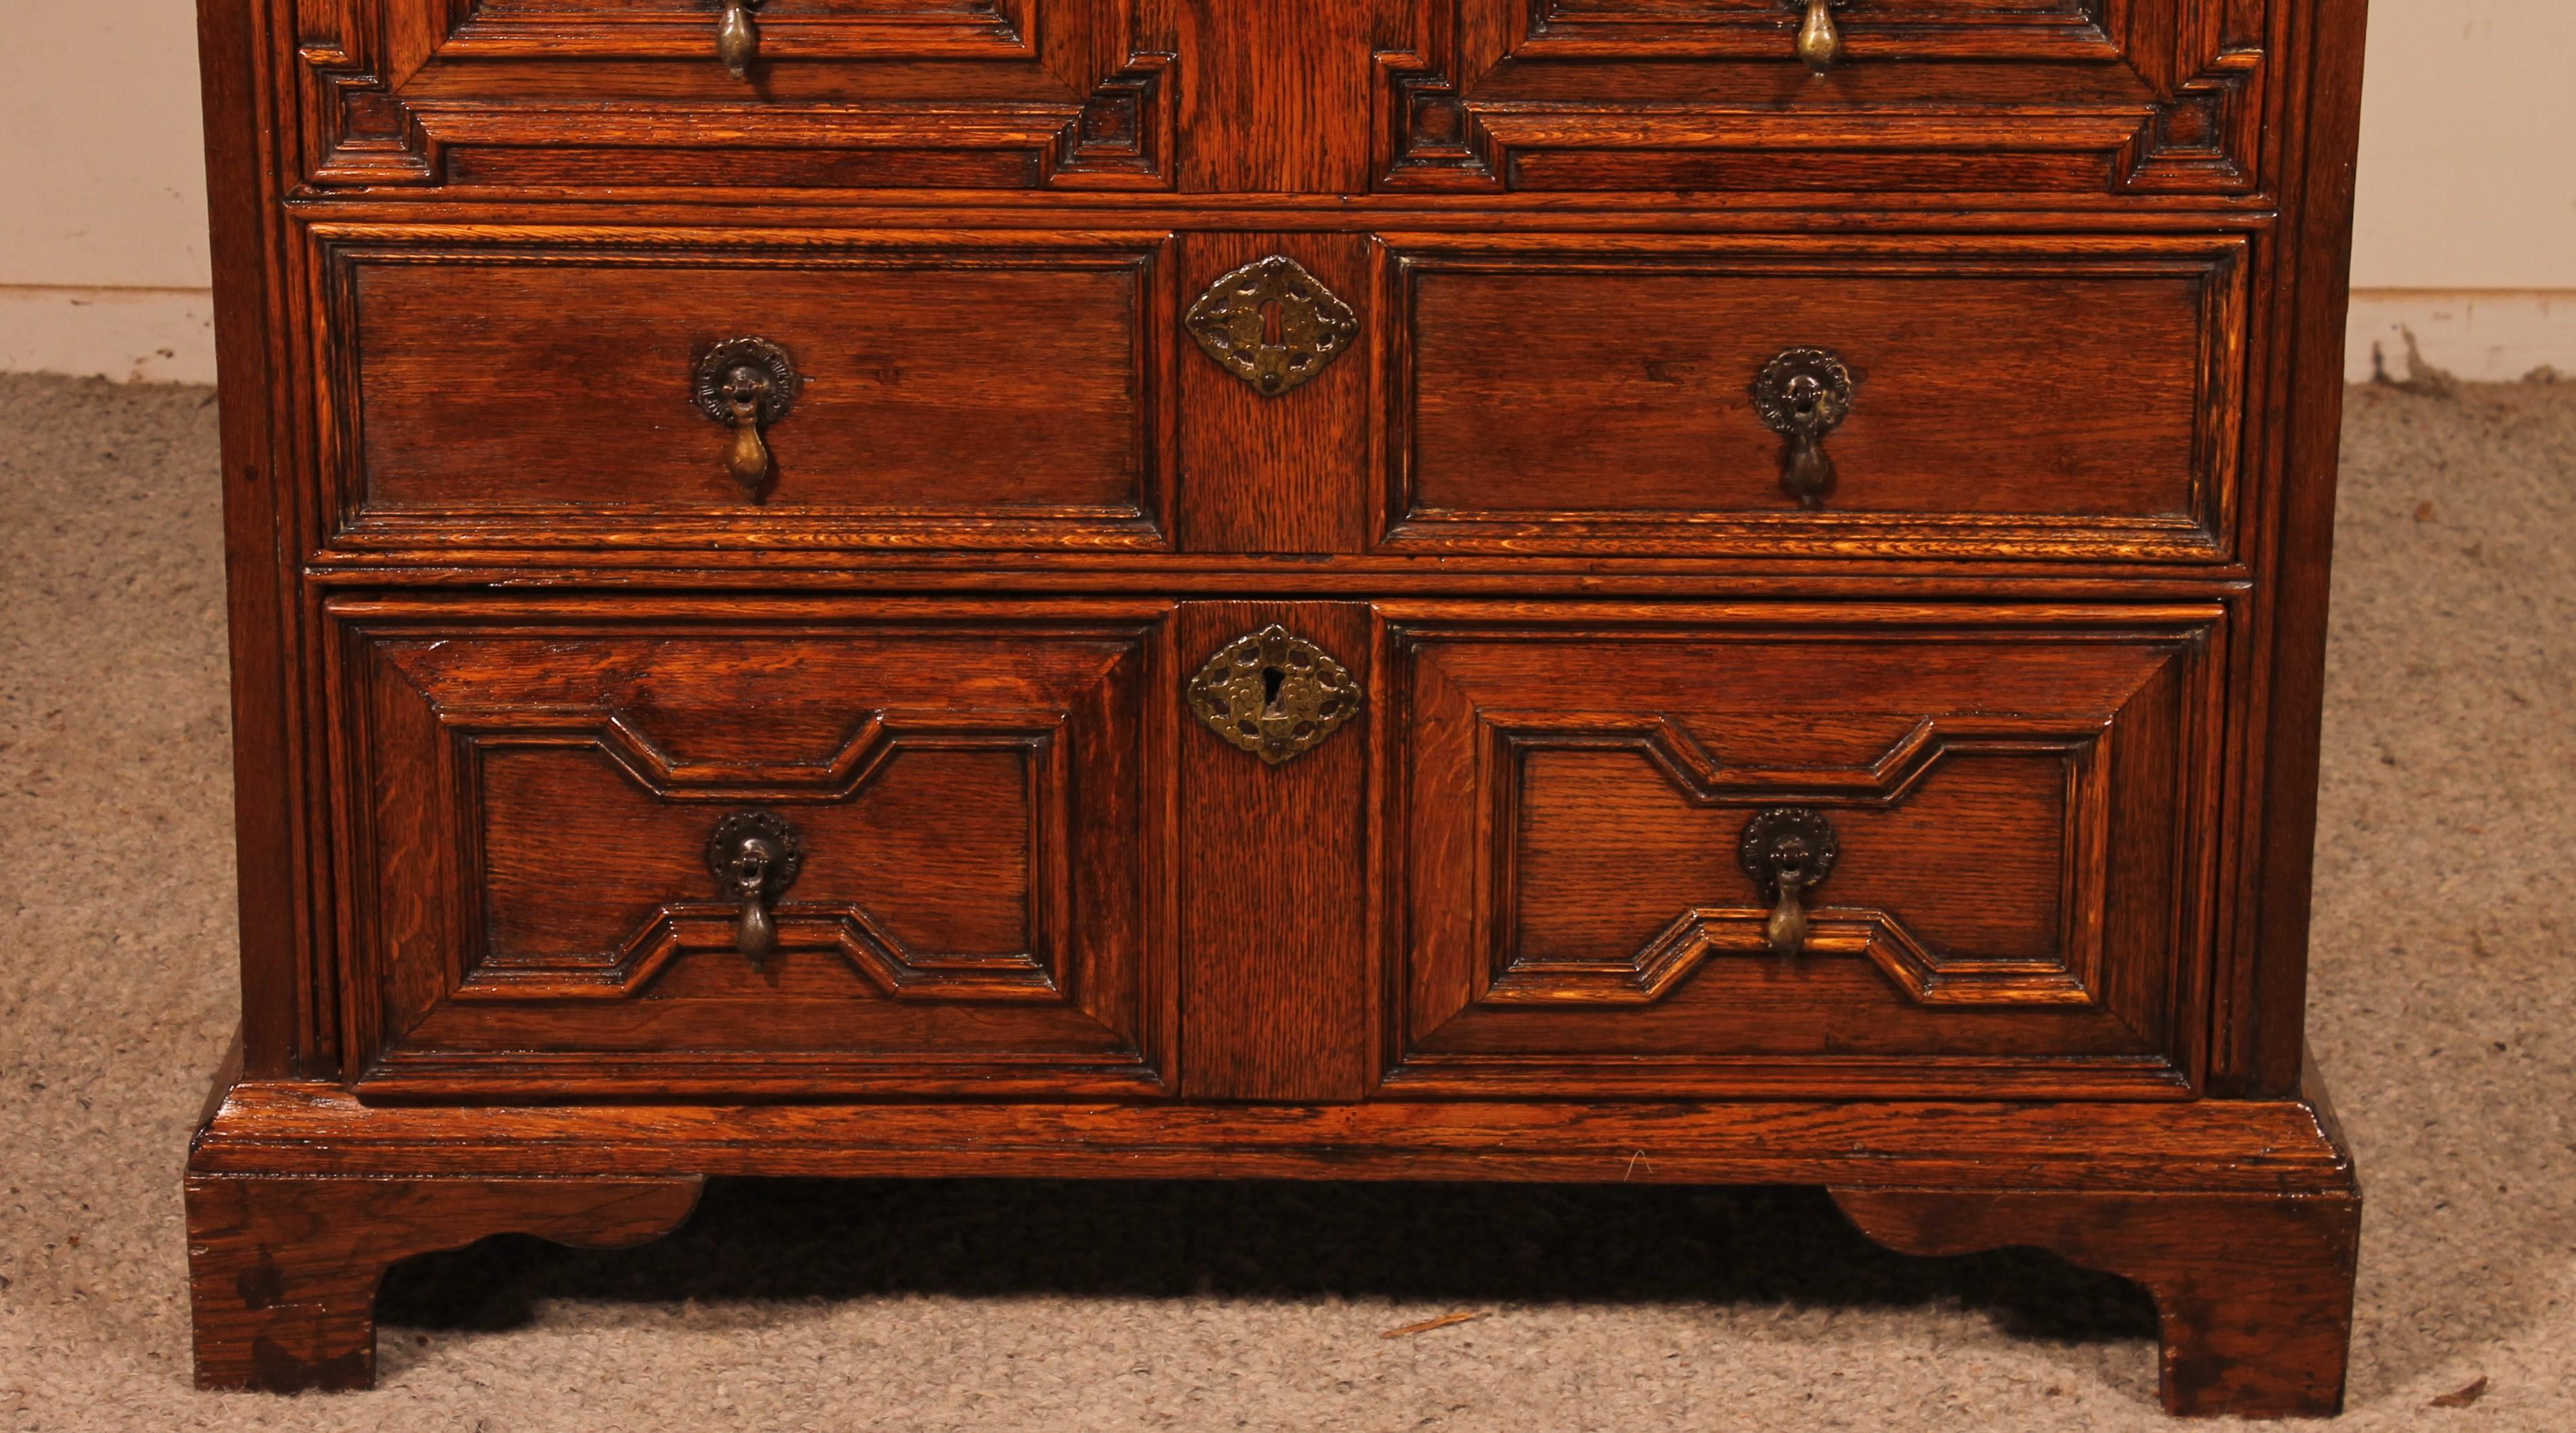 Superb and rare jacobean chest of drawers from the 17th century from England
small model composed of 4 drawers with very beautiful moldings with geometric shapes typical of Jacobean furniture.
It has entrances called drop handles typical of this